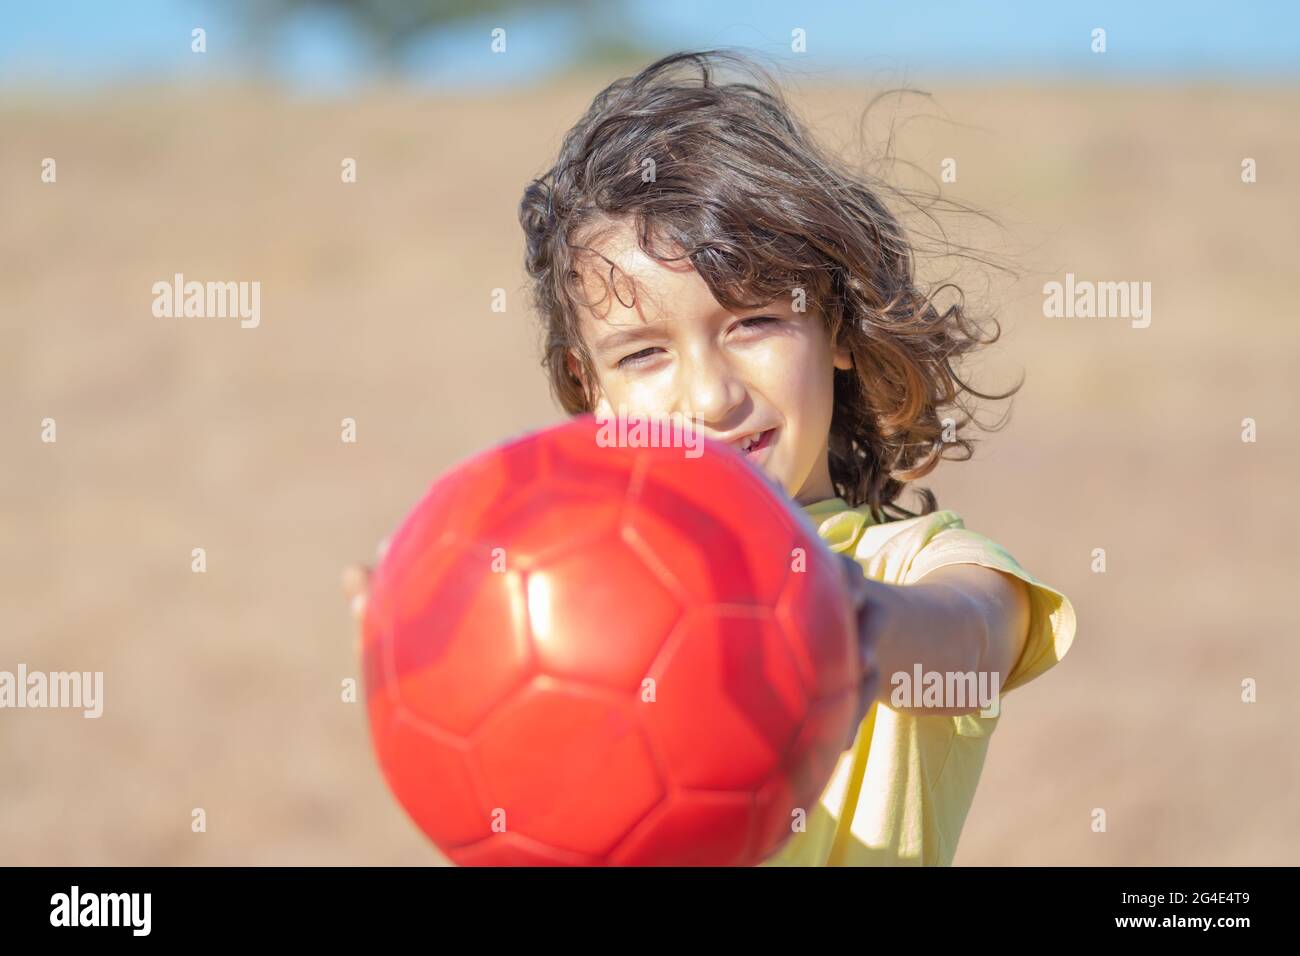 little boy with long hair and yellow t-shirt plays with his red ball in a field on a sunny summer day Stock Photo